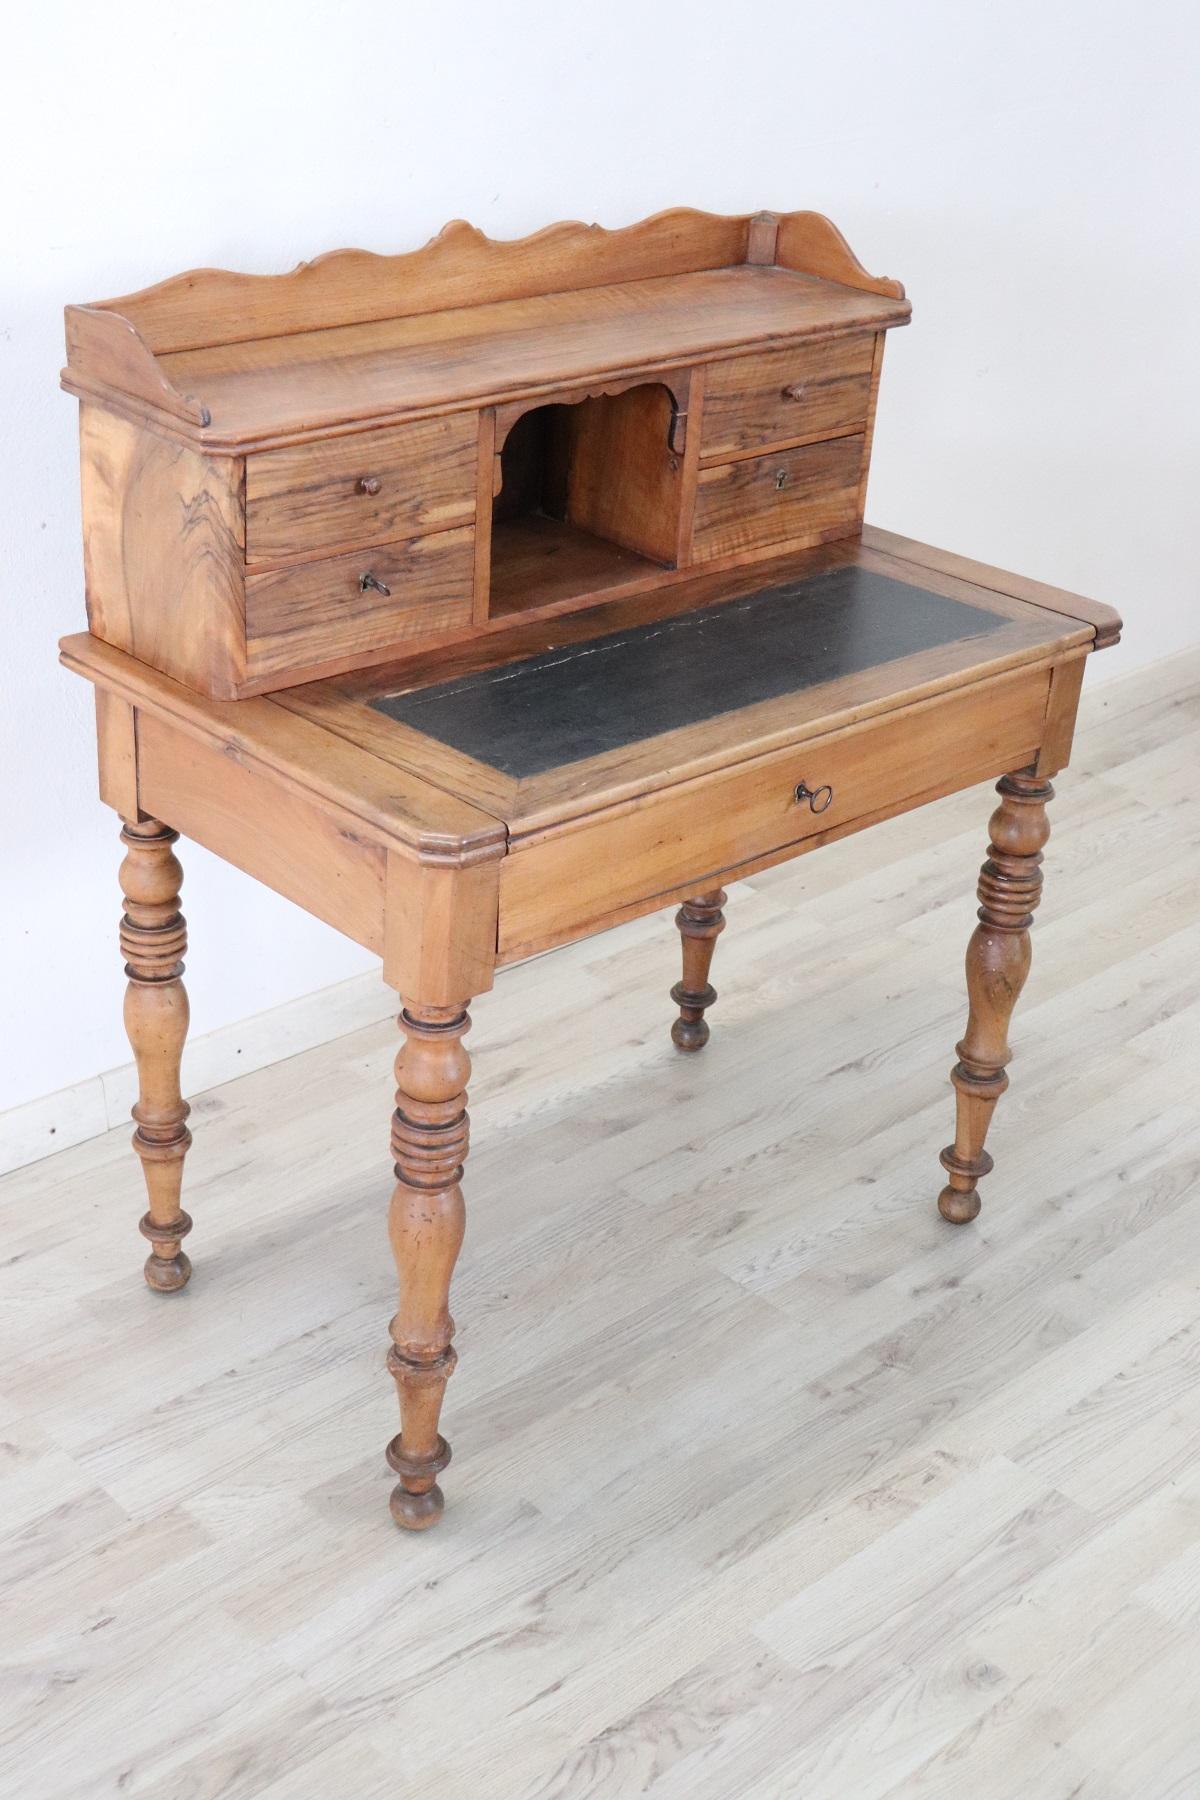 Elegant and essential antique Italian writing desk. Rare and precious solid walnut wood. Comfortable size for a practical use. The desk has elegant turned legs. In the lower part one large drawer and in the upper part four smaller drawers. The top